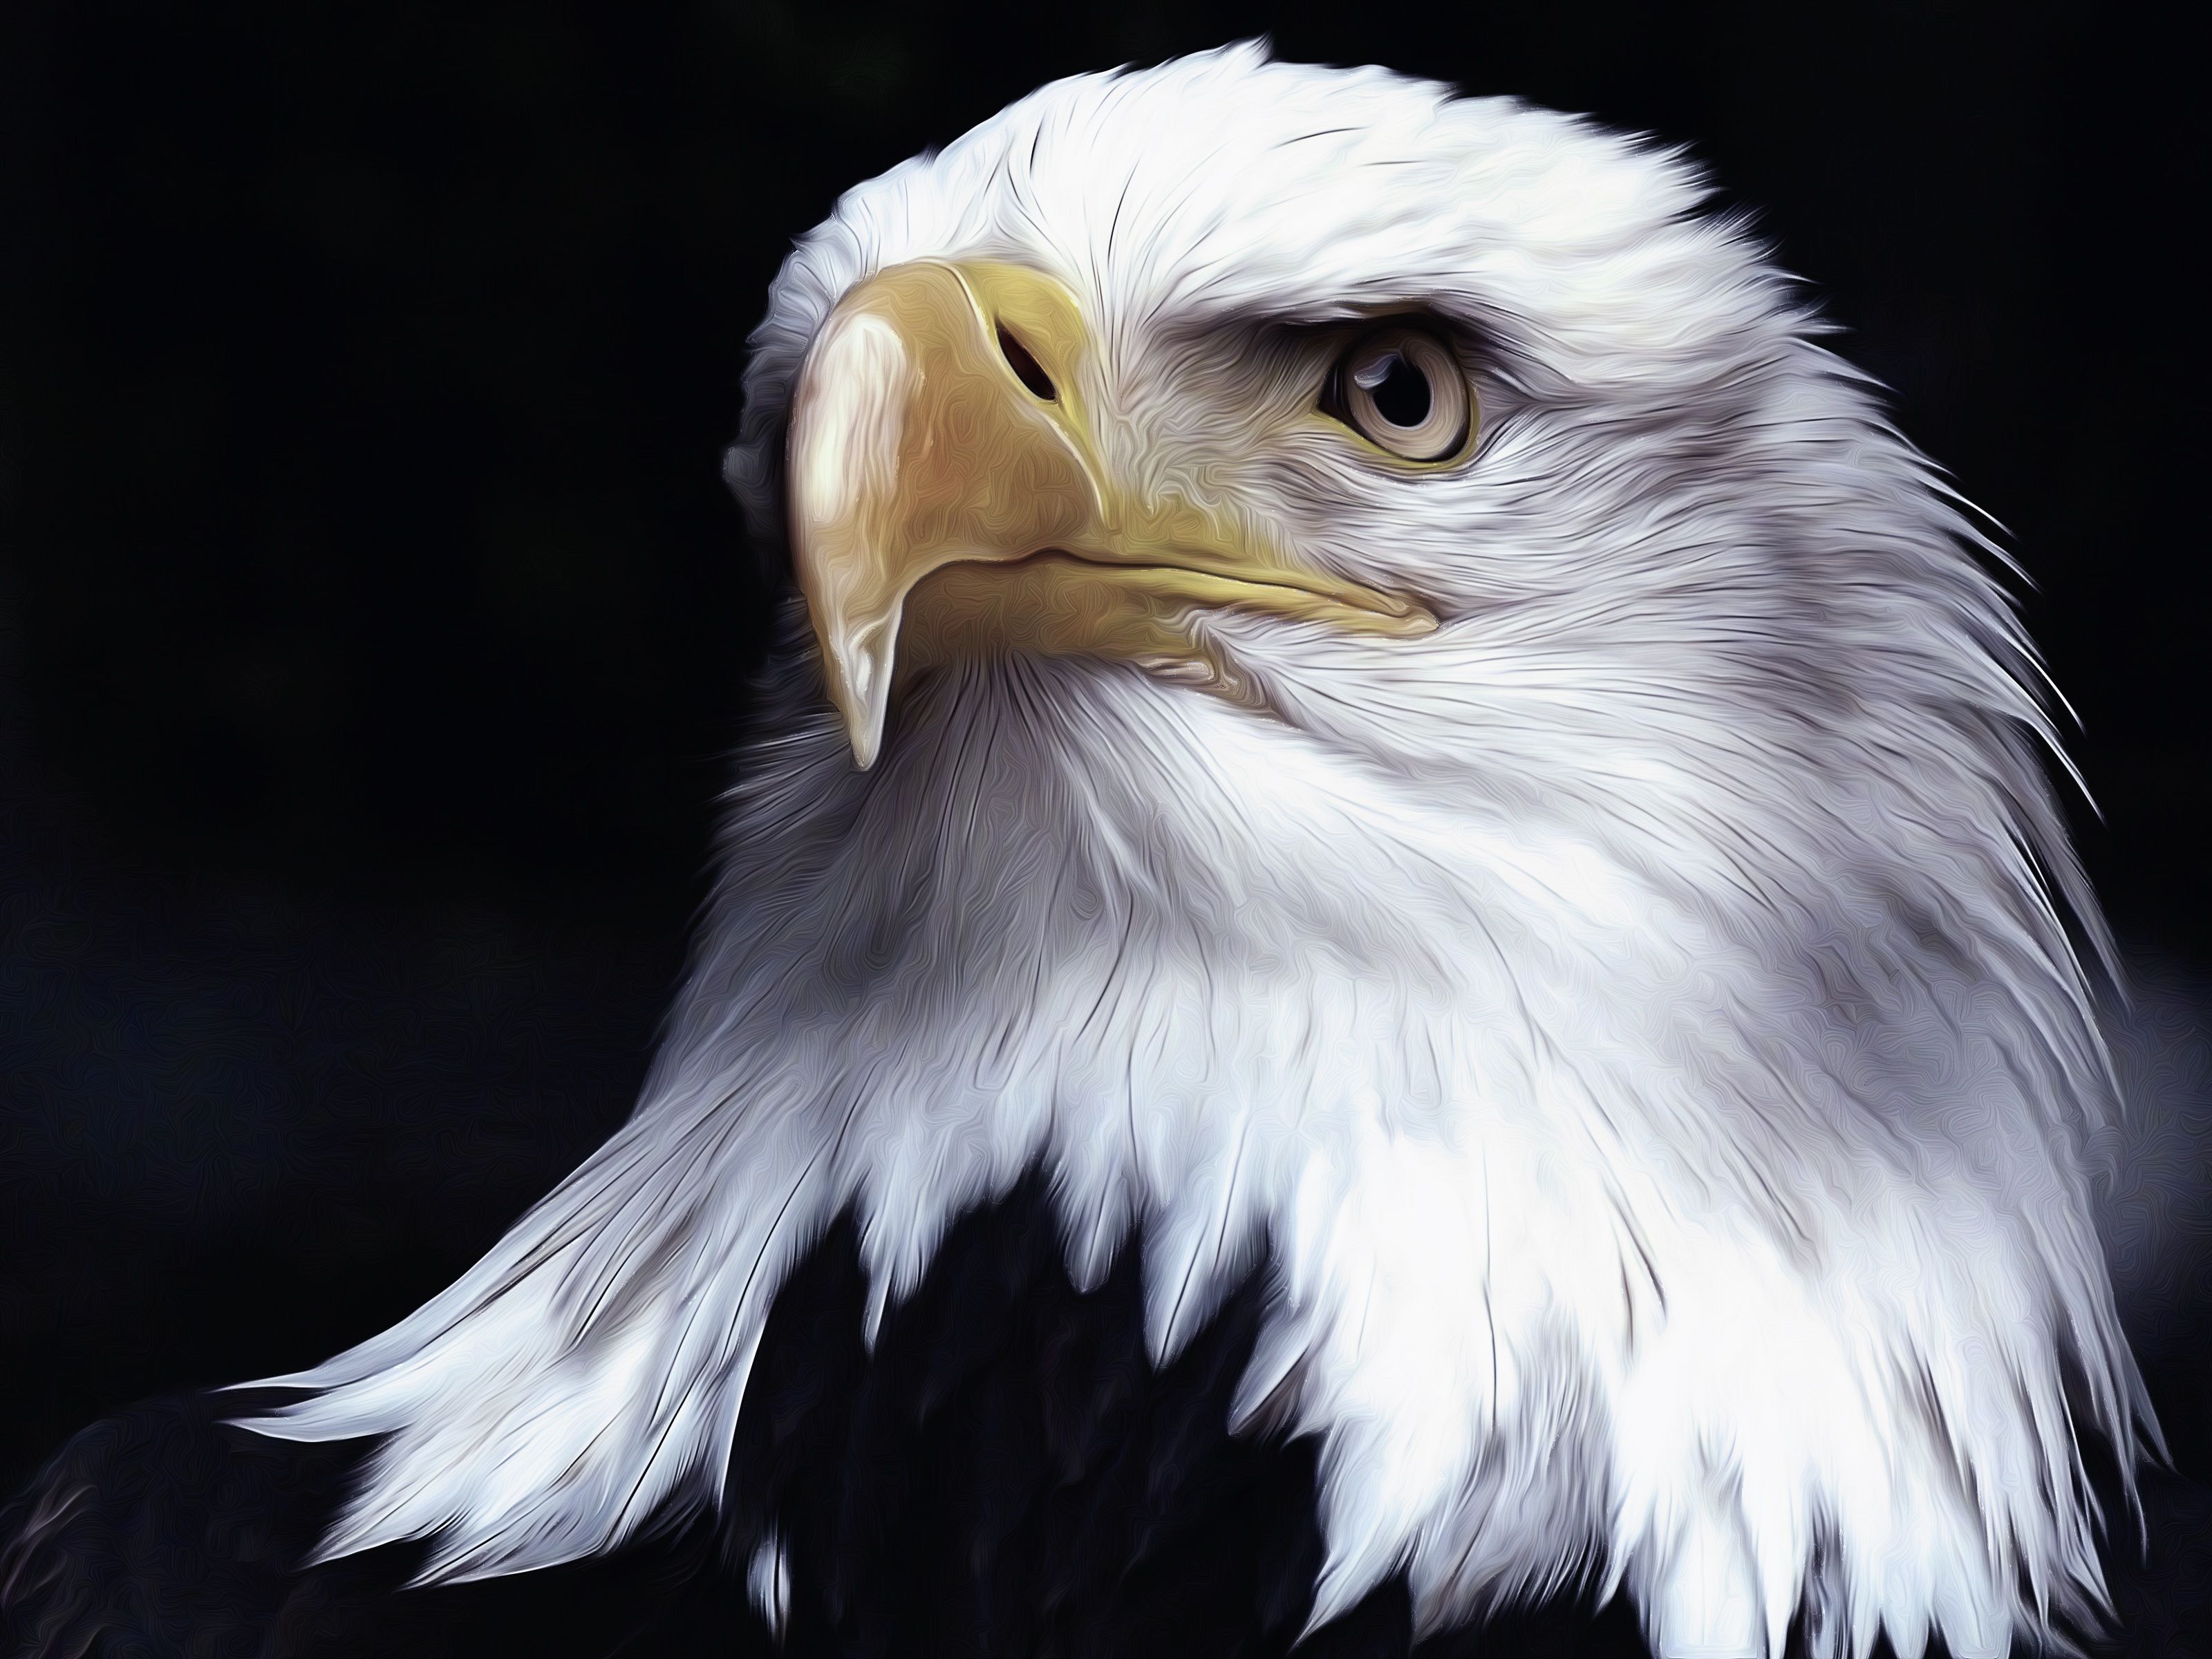 Oil Painting Portrait of a Bald Eagle HD Wallpaper. Background